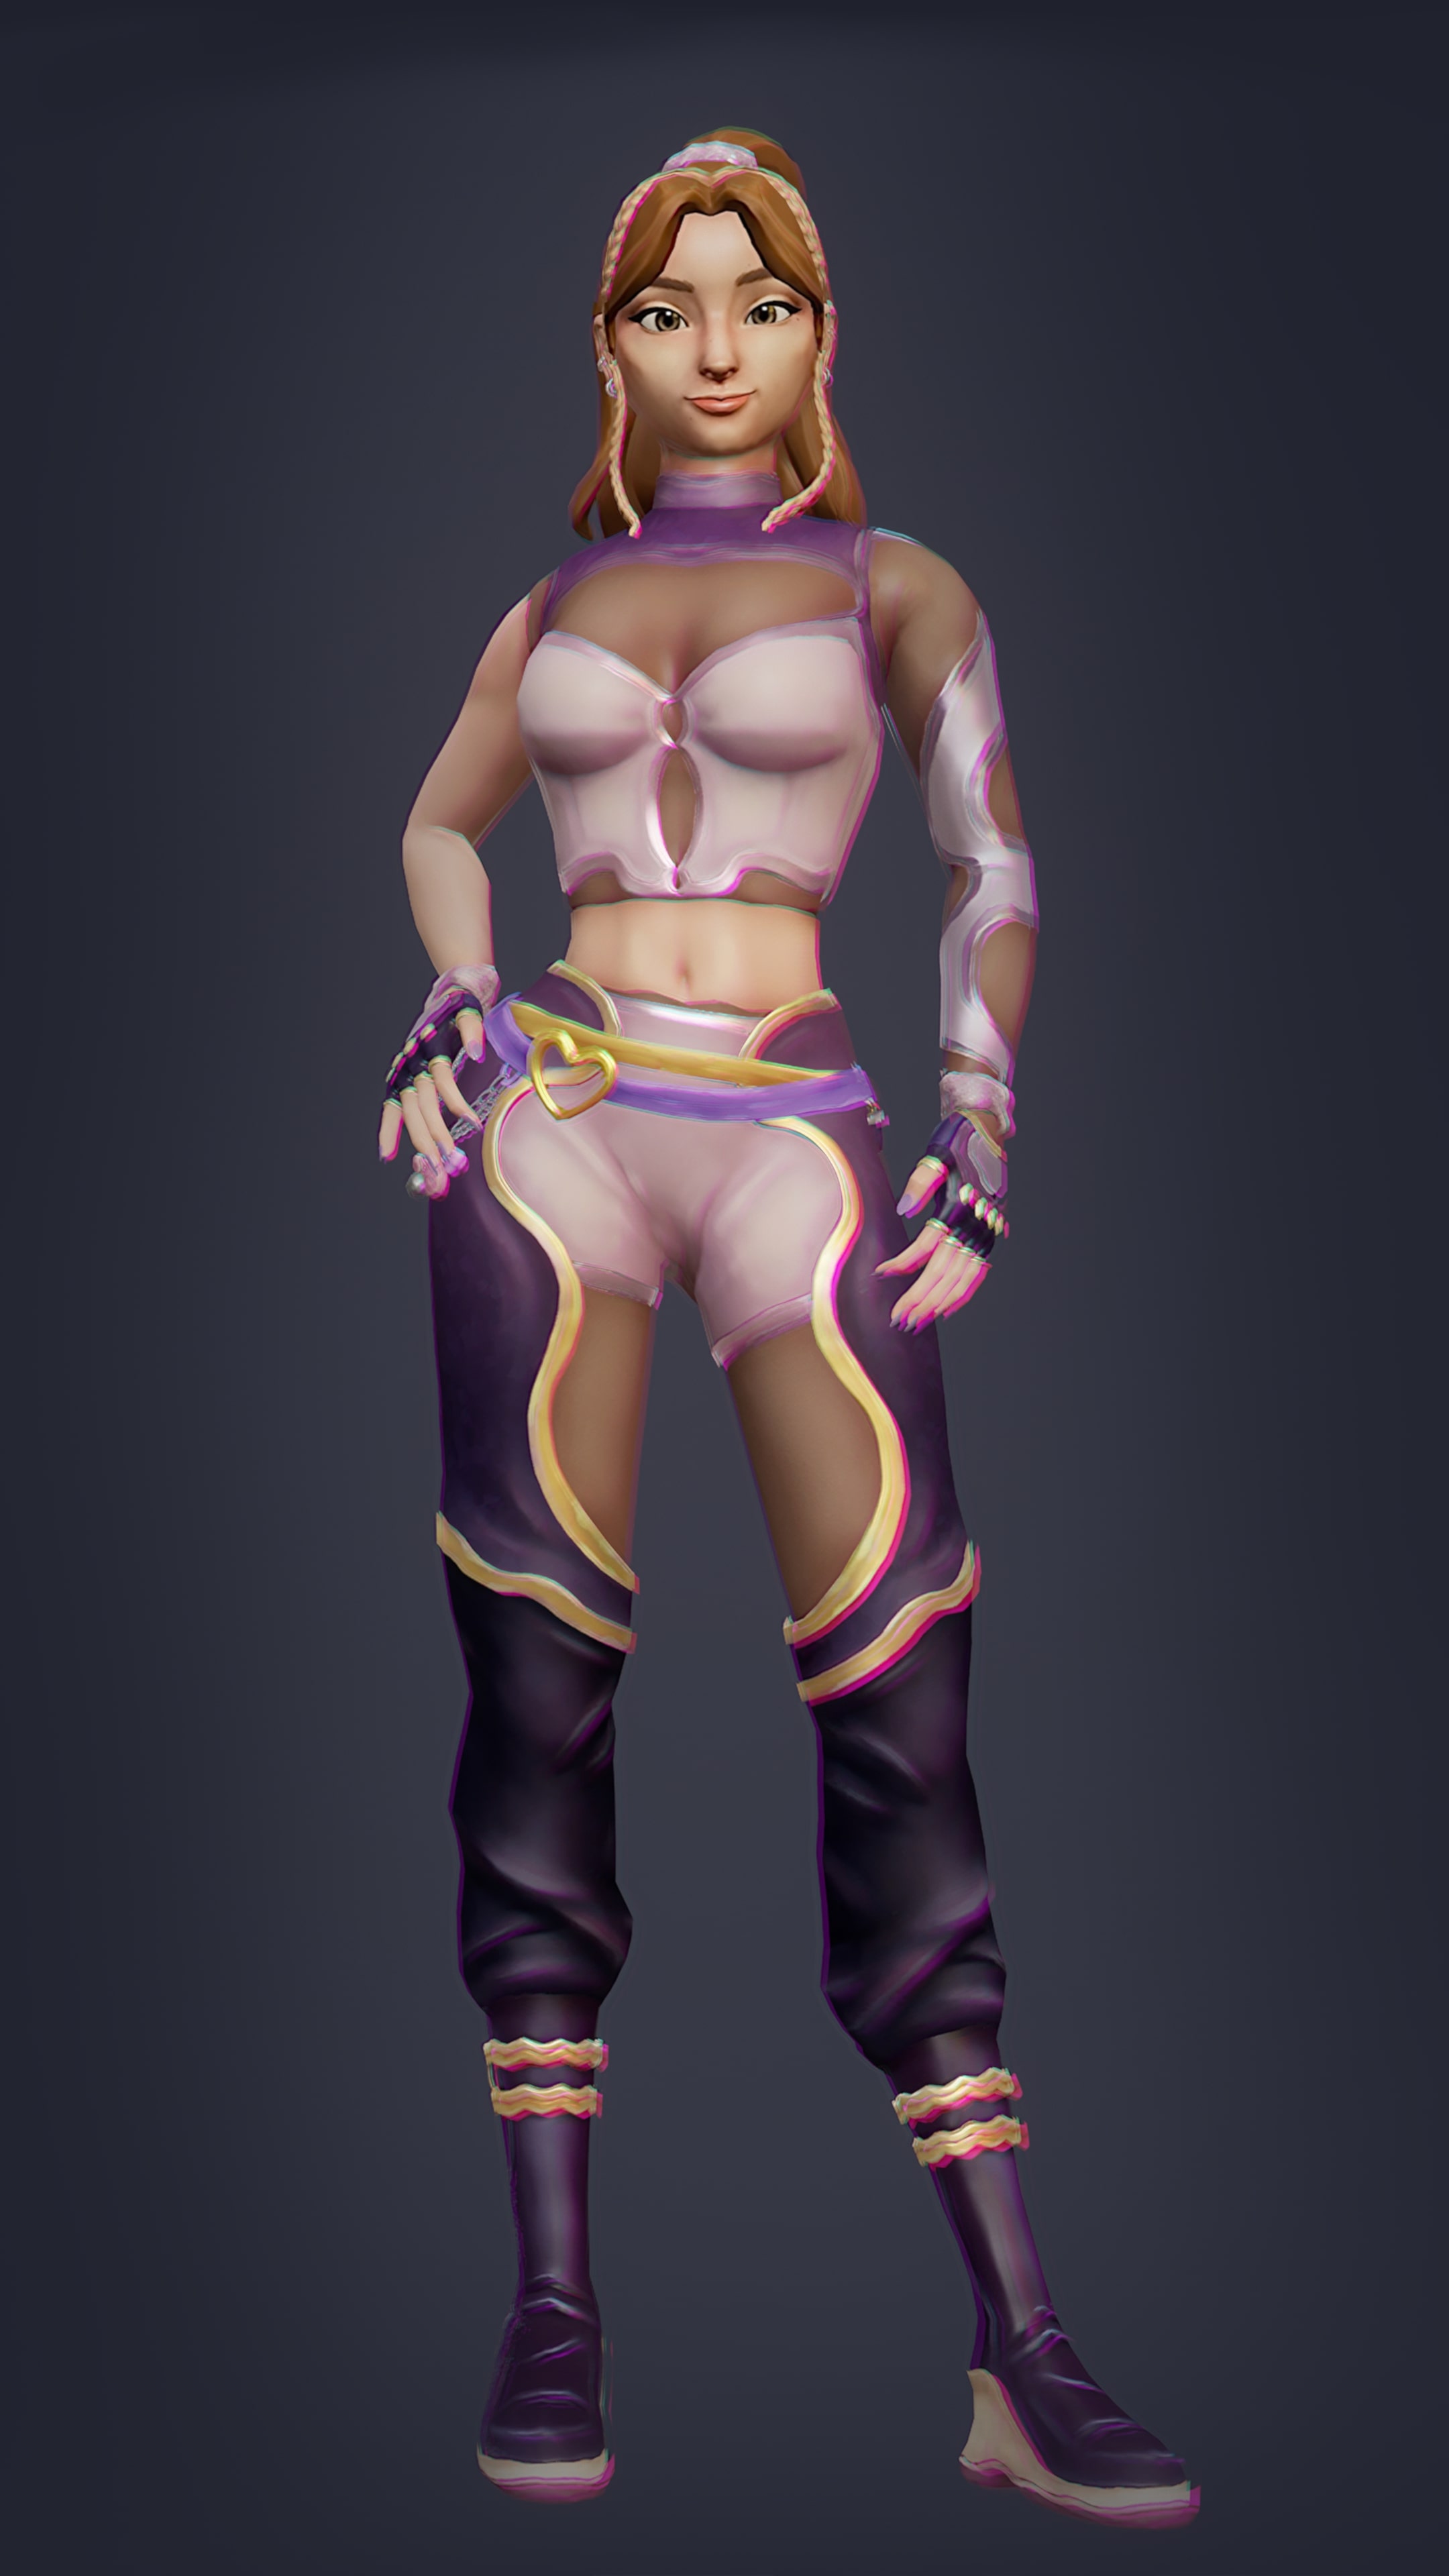 A female 3D character model viewed from the front in the style of Valorant